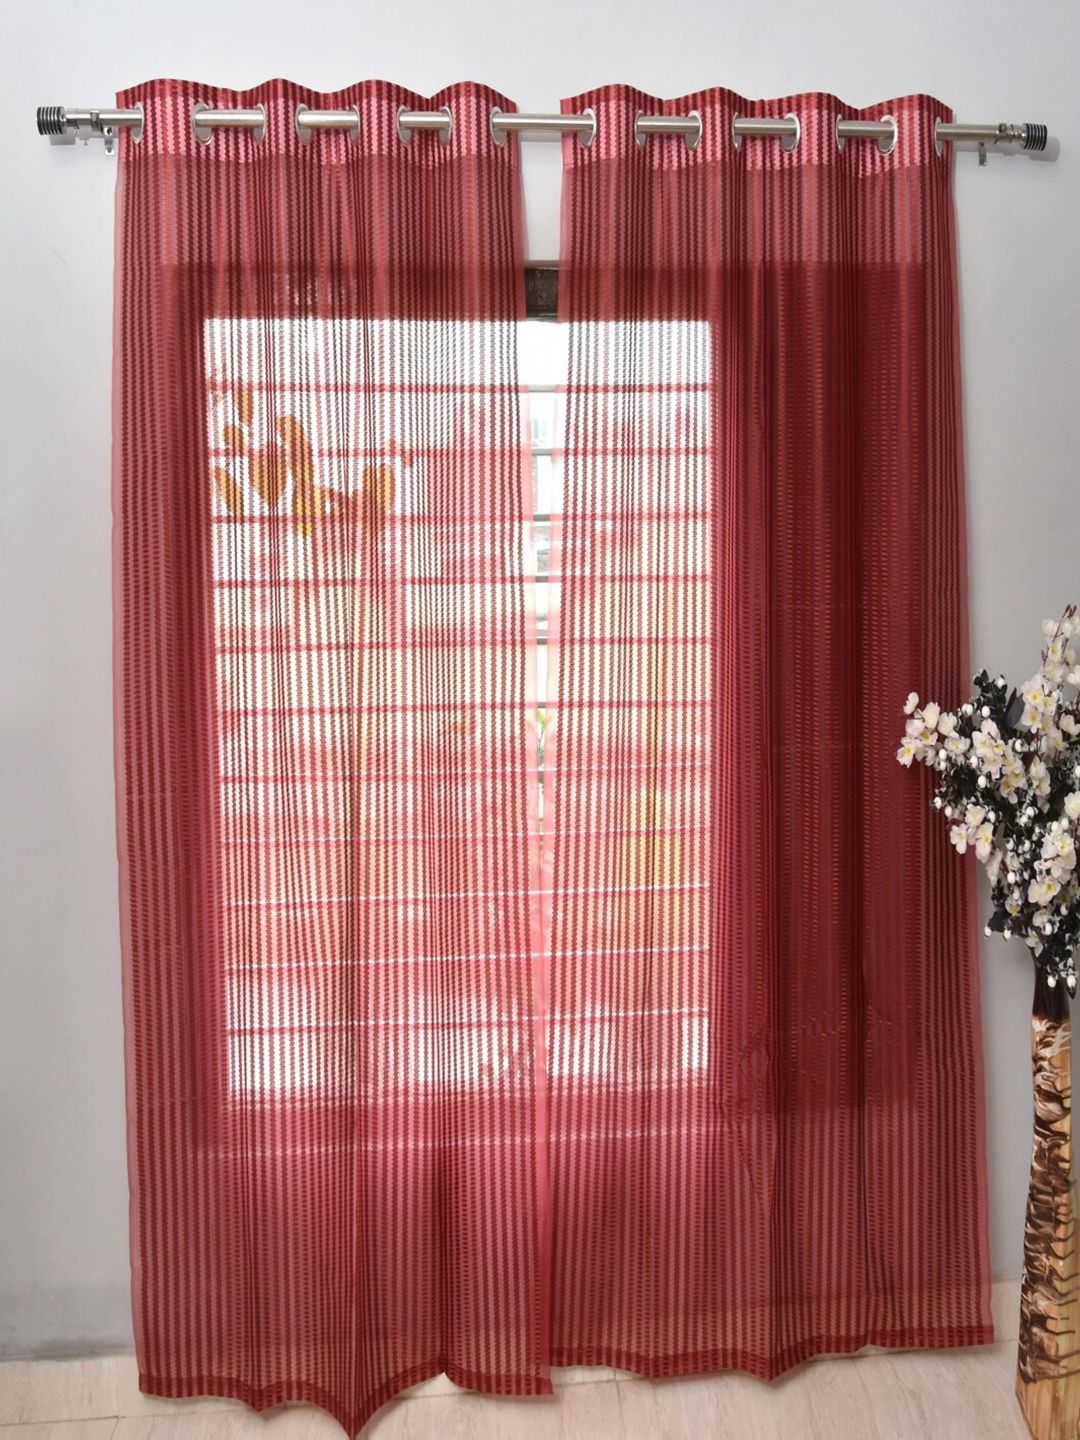 Homefab India Unisex Maroon Curtains and Sheers Price in India